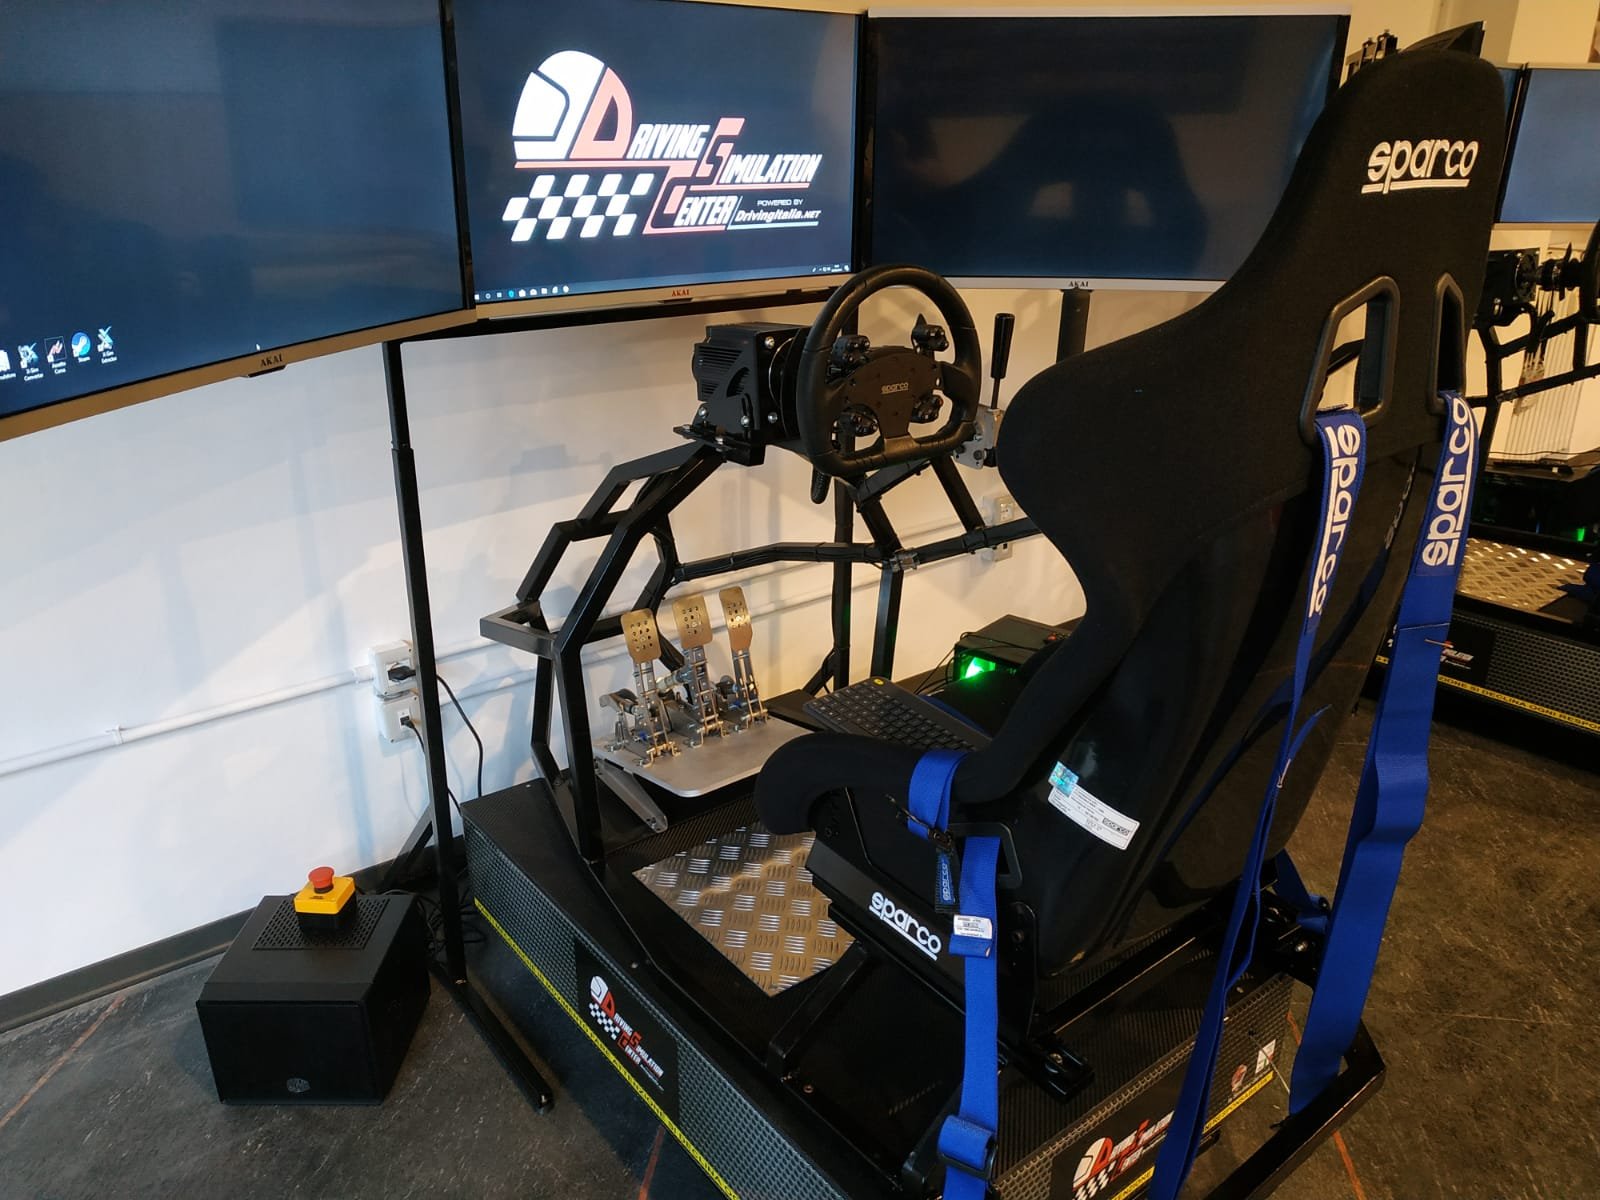 More information about "SPARCO partner del nuovo Driving Simulation Center"